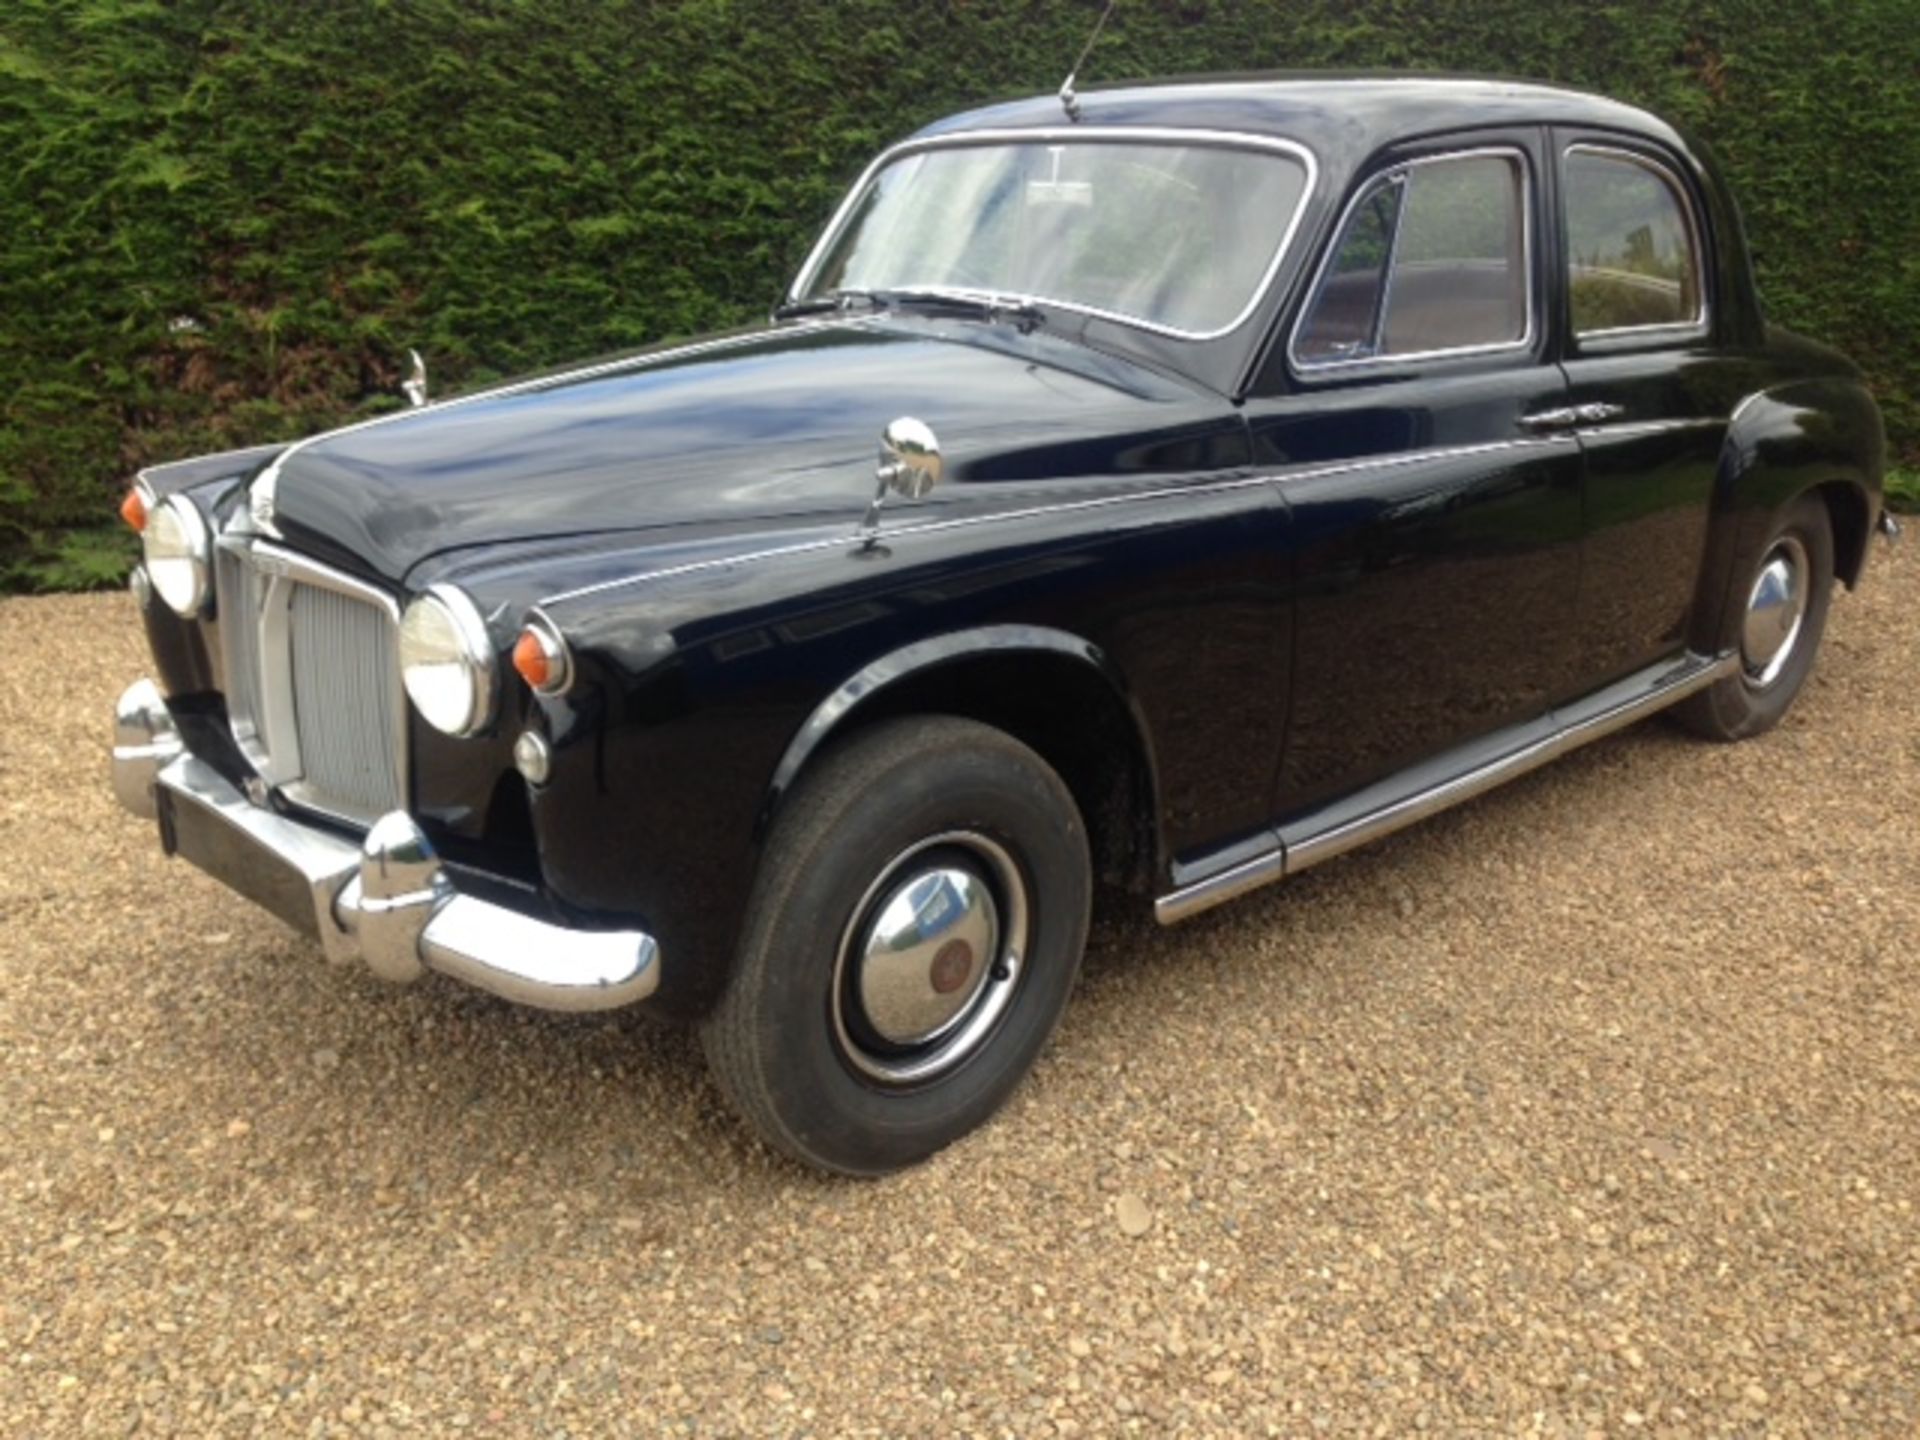 ROVER, 75 - 2230cc, Chassis number 606900013 - this example was originally exported by Rover as an